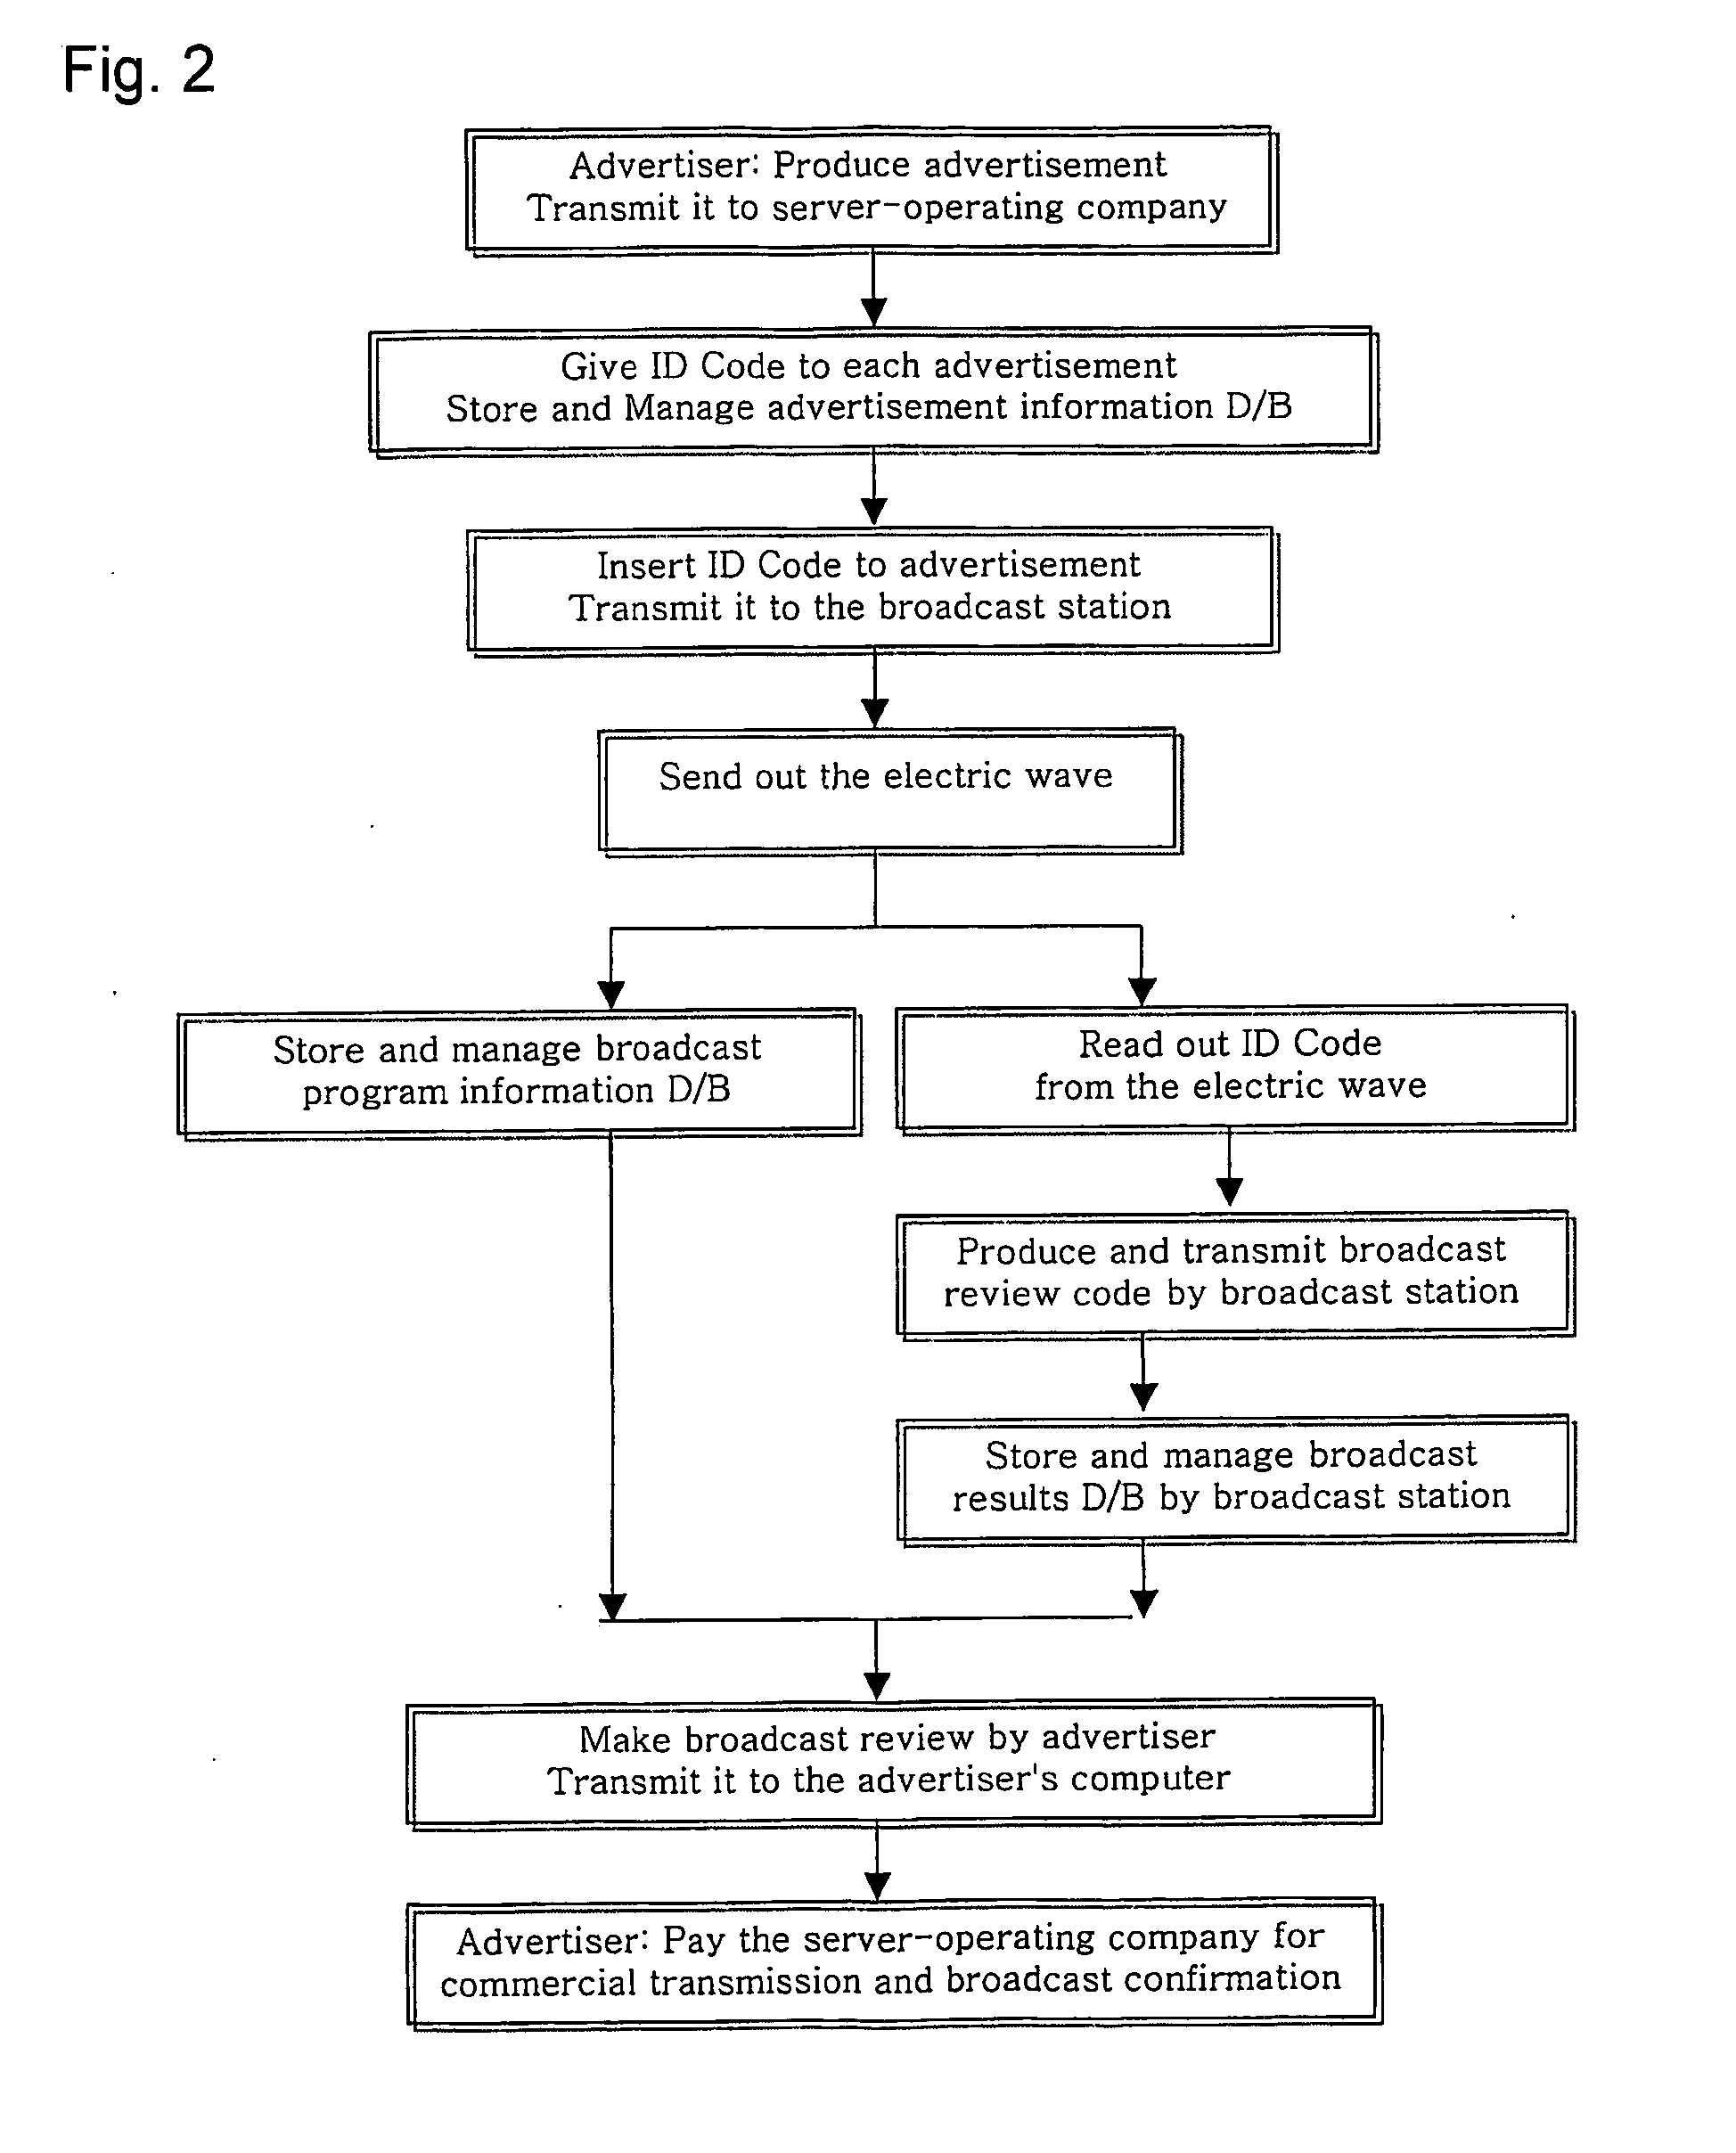 Method and system for on-line delivery of advertising release material and confirmation of on-air transmission